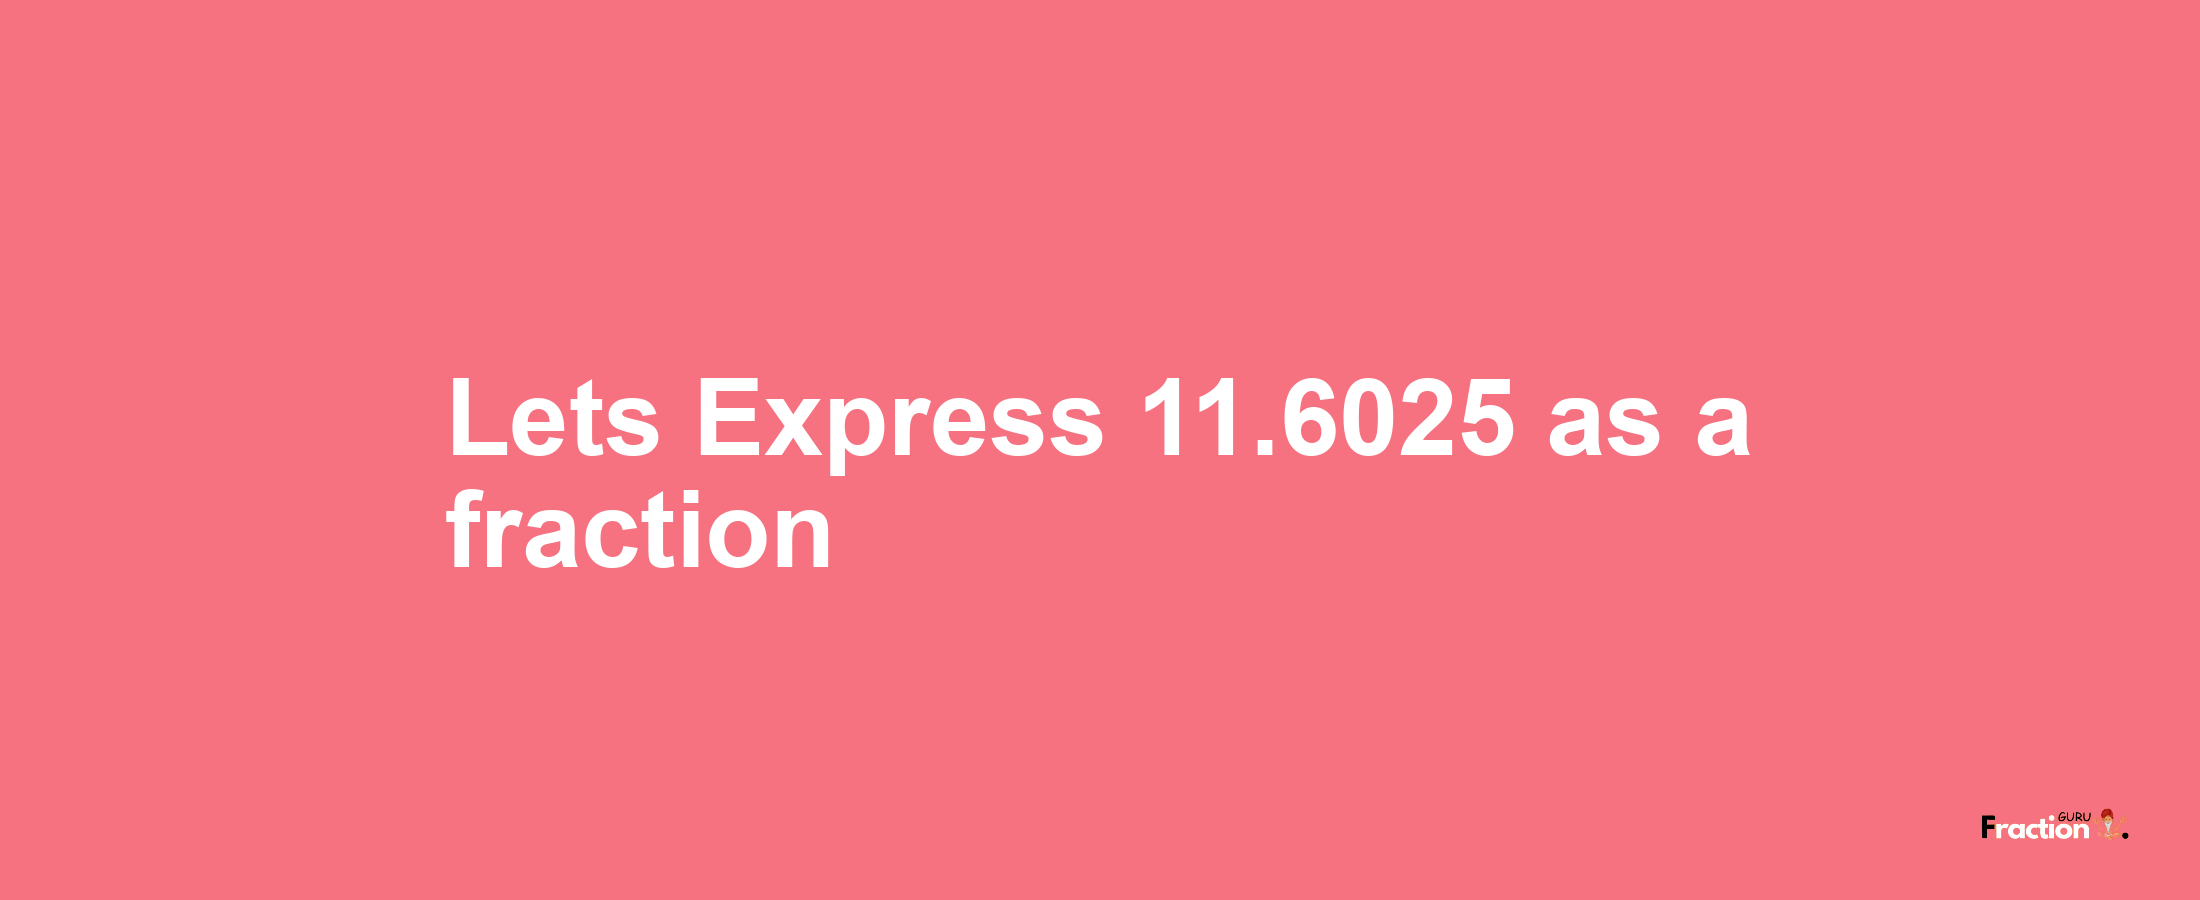 Lets Express 11.6025 as afraction